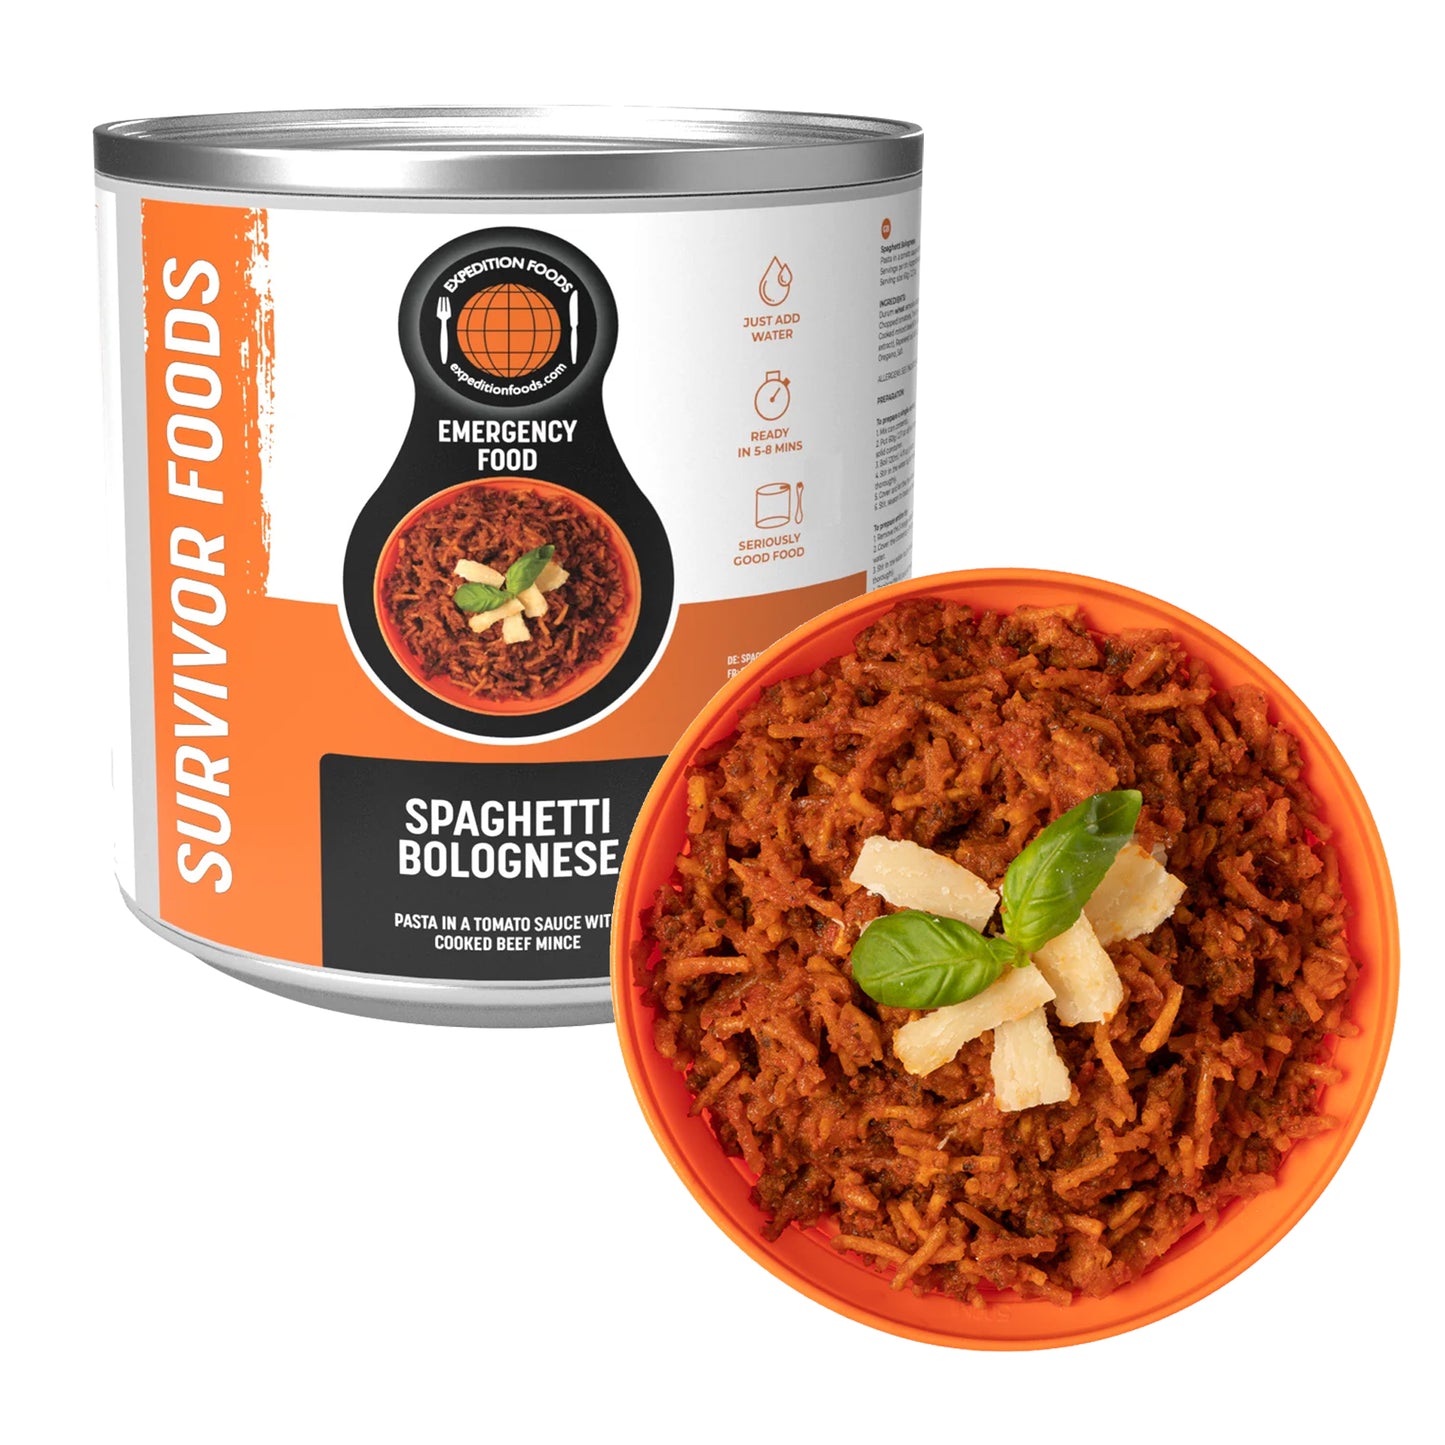 Expedition Foods Spaghetti Bolognese Meal Long Life